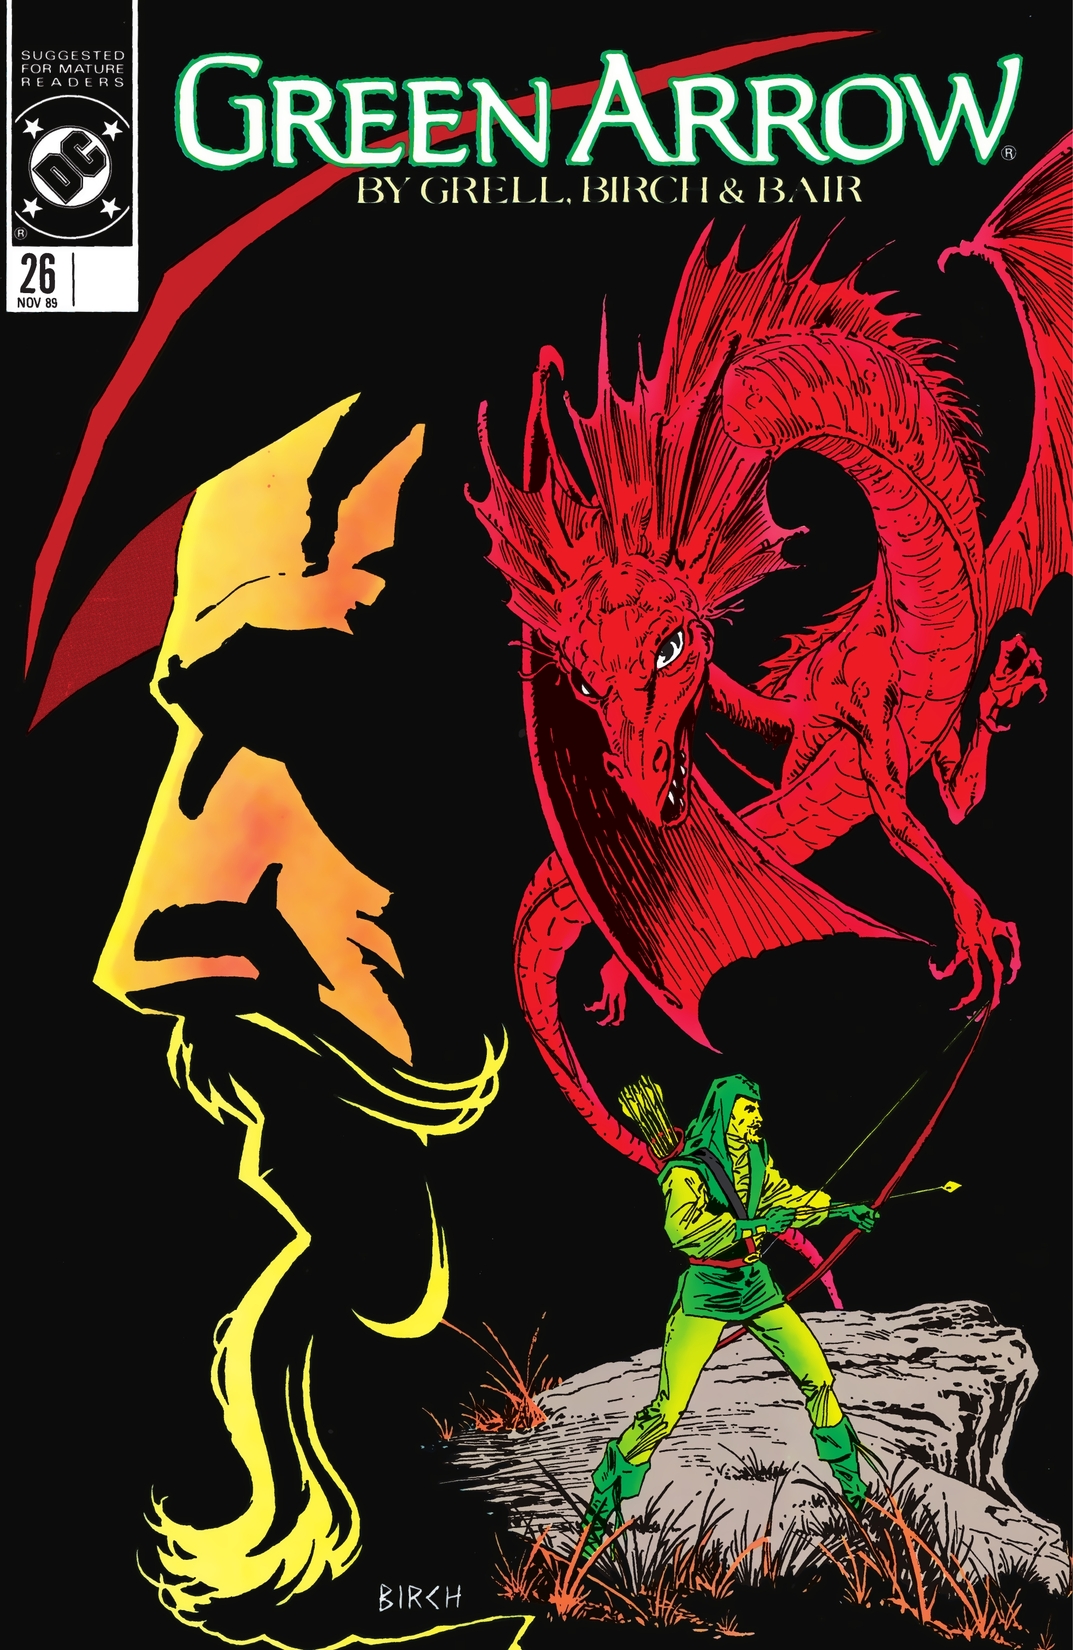 Green Arrow (1988-1998) #26 preview images